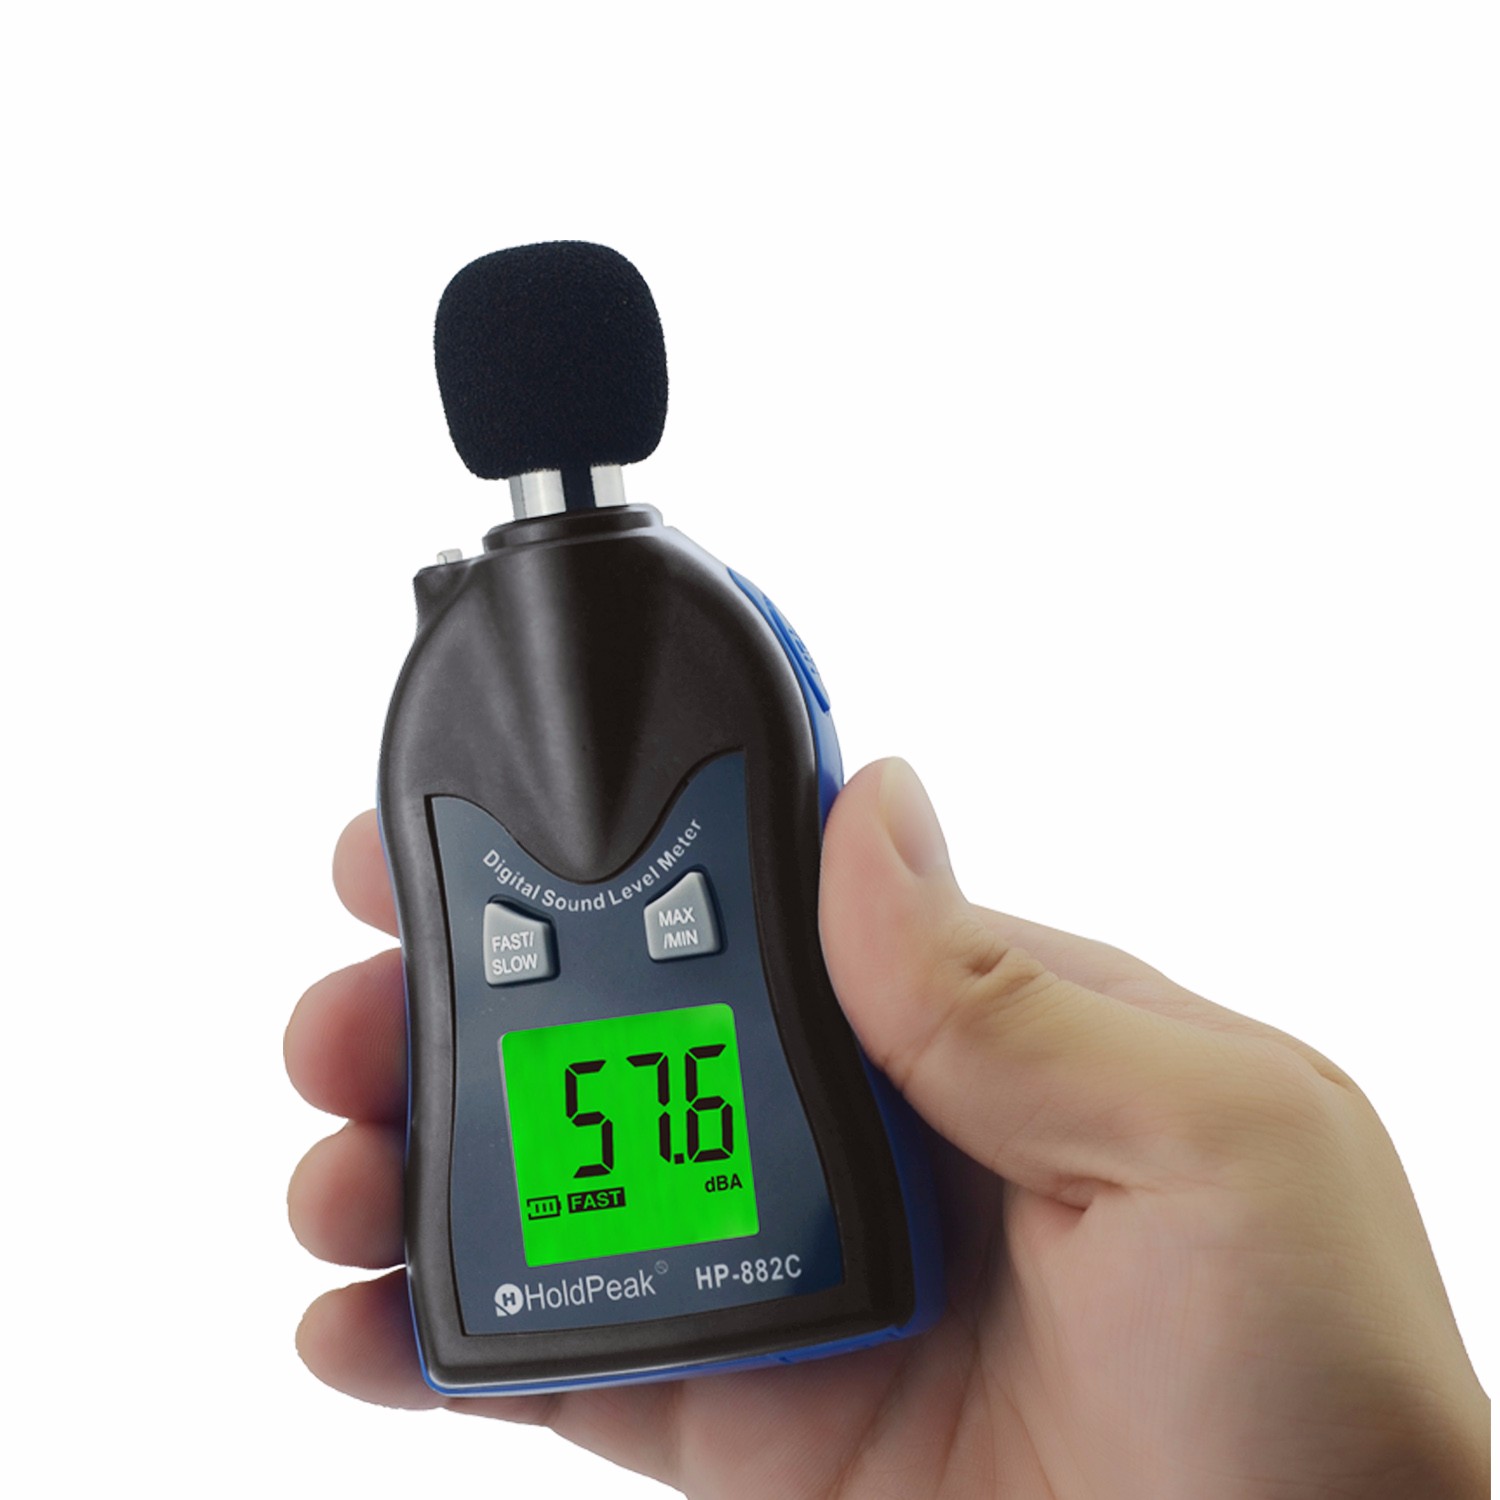 HoldPeak measurement sound frequency meter company for measuring steady state noise